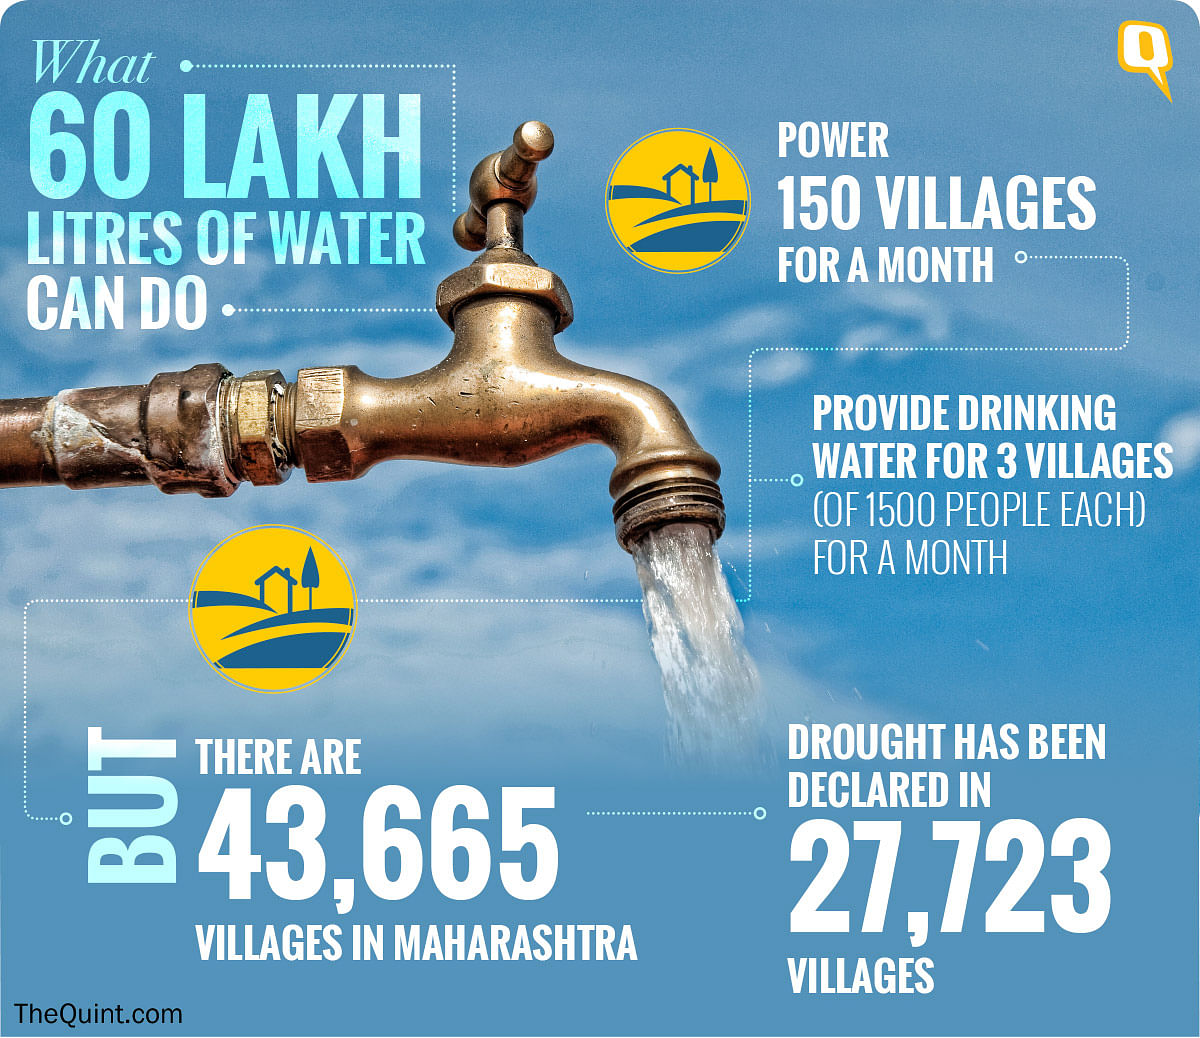 60 lakh litres of water wouldn’t even make a dent in the drought faced by more than 27,000 Maharashtran villages. 